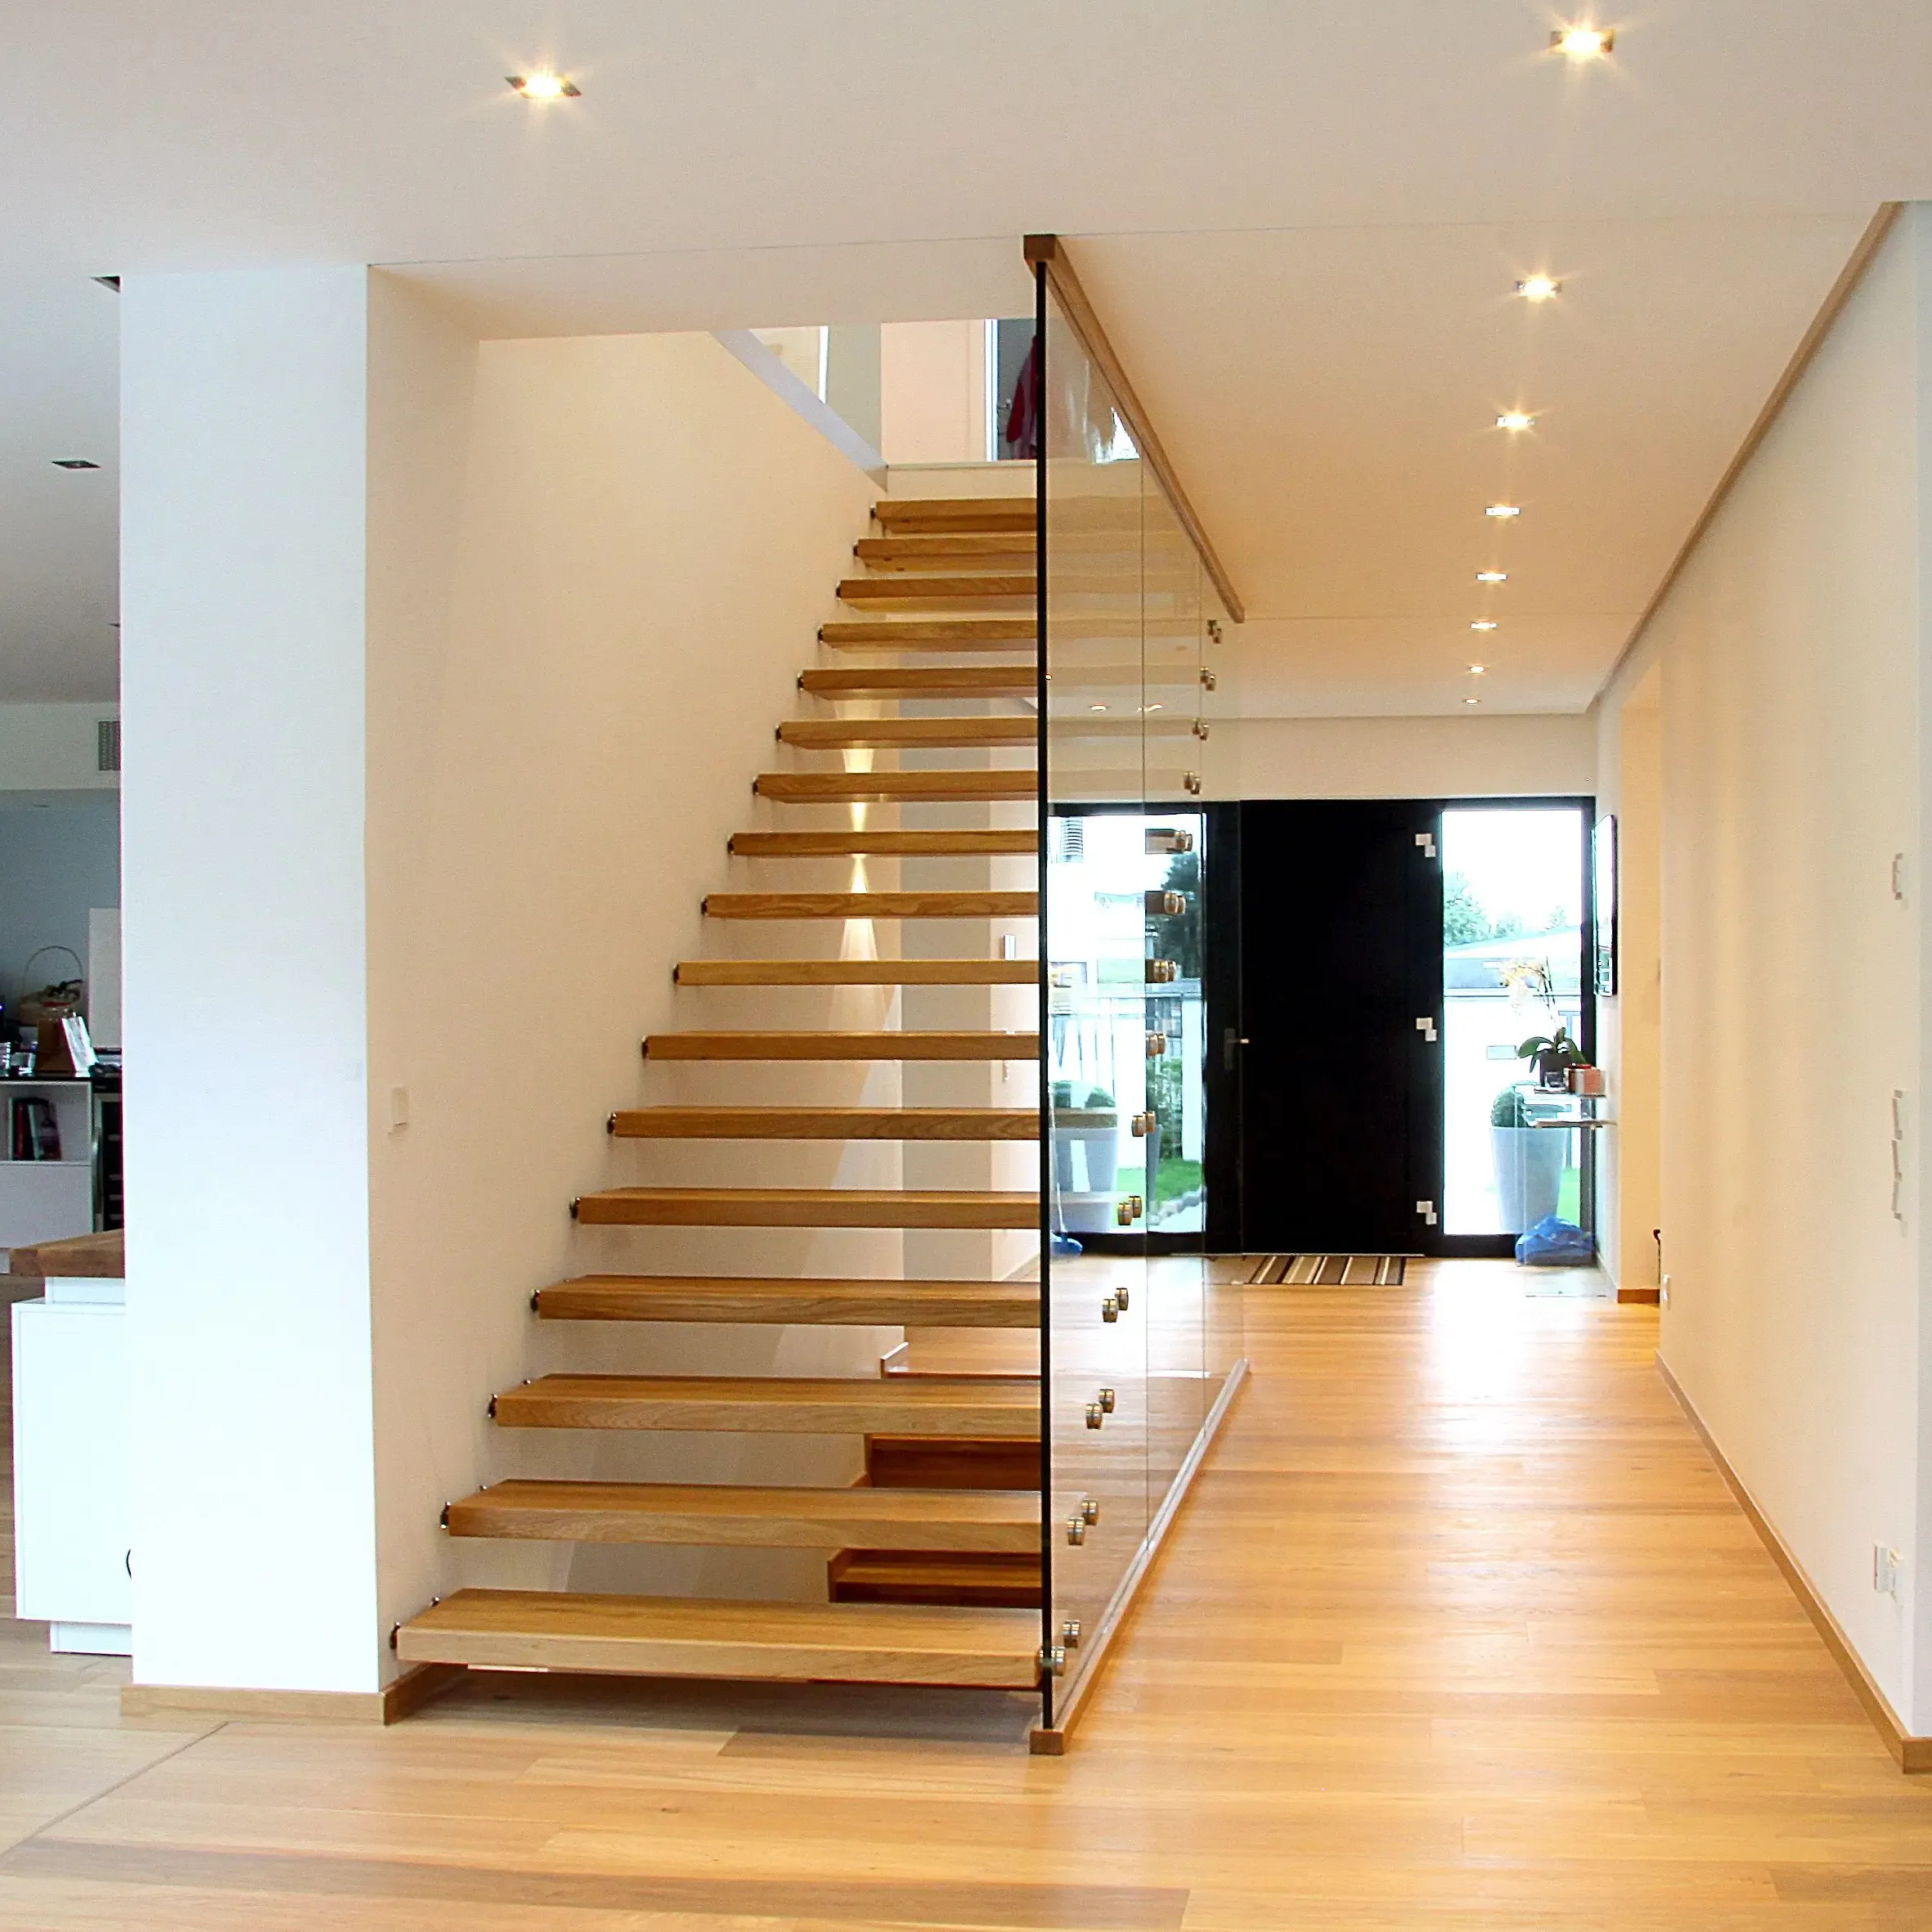 Modern design invisible steel structure natural timber wood steps floating cantilever stairs with glass railings